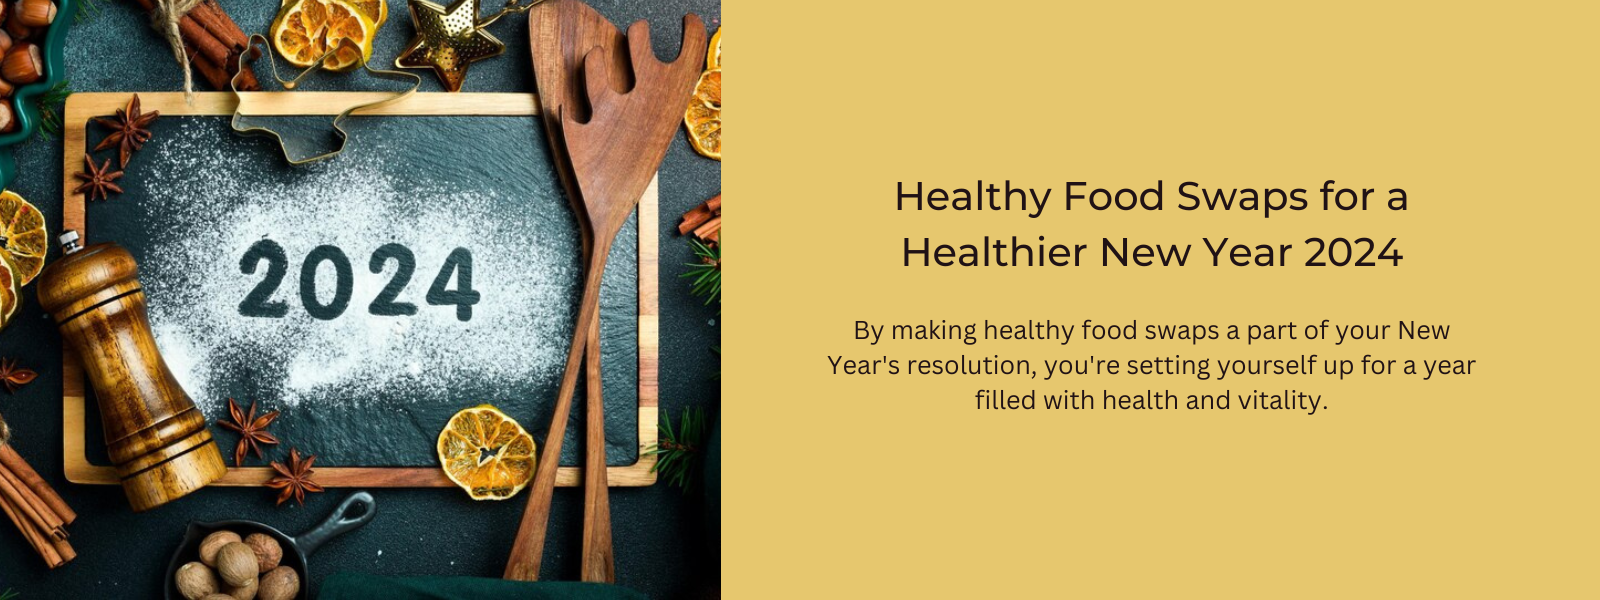 Healthy Food Swaps for a Healthier New Year 2024